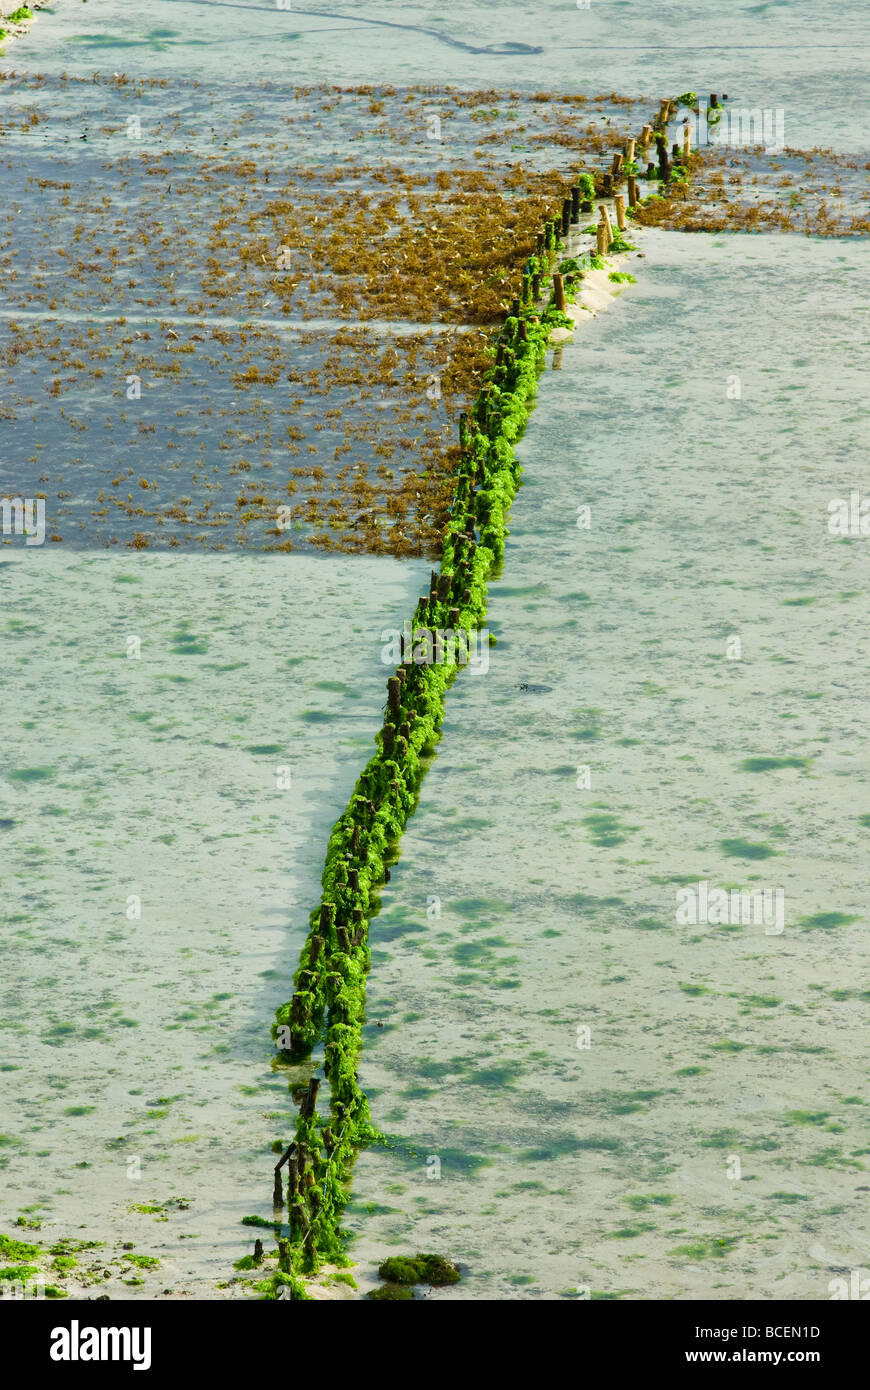 Posts imbedded in the ocean floor mark the boundary of seaweed farms. Stock Photo